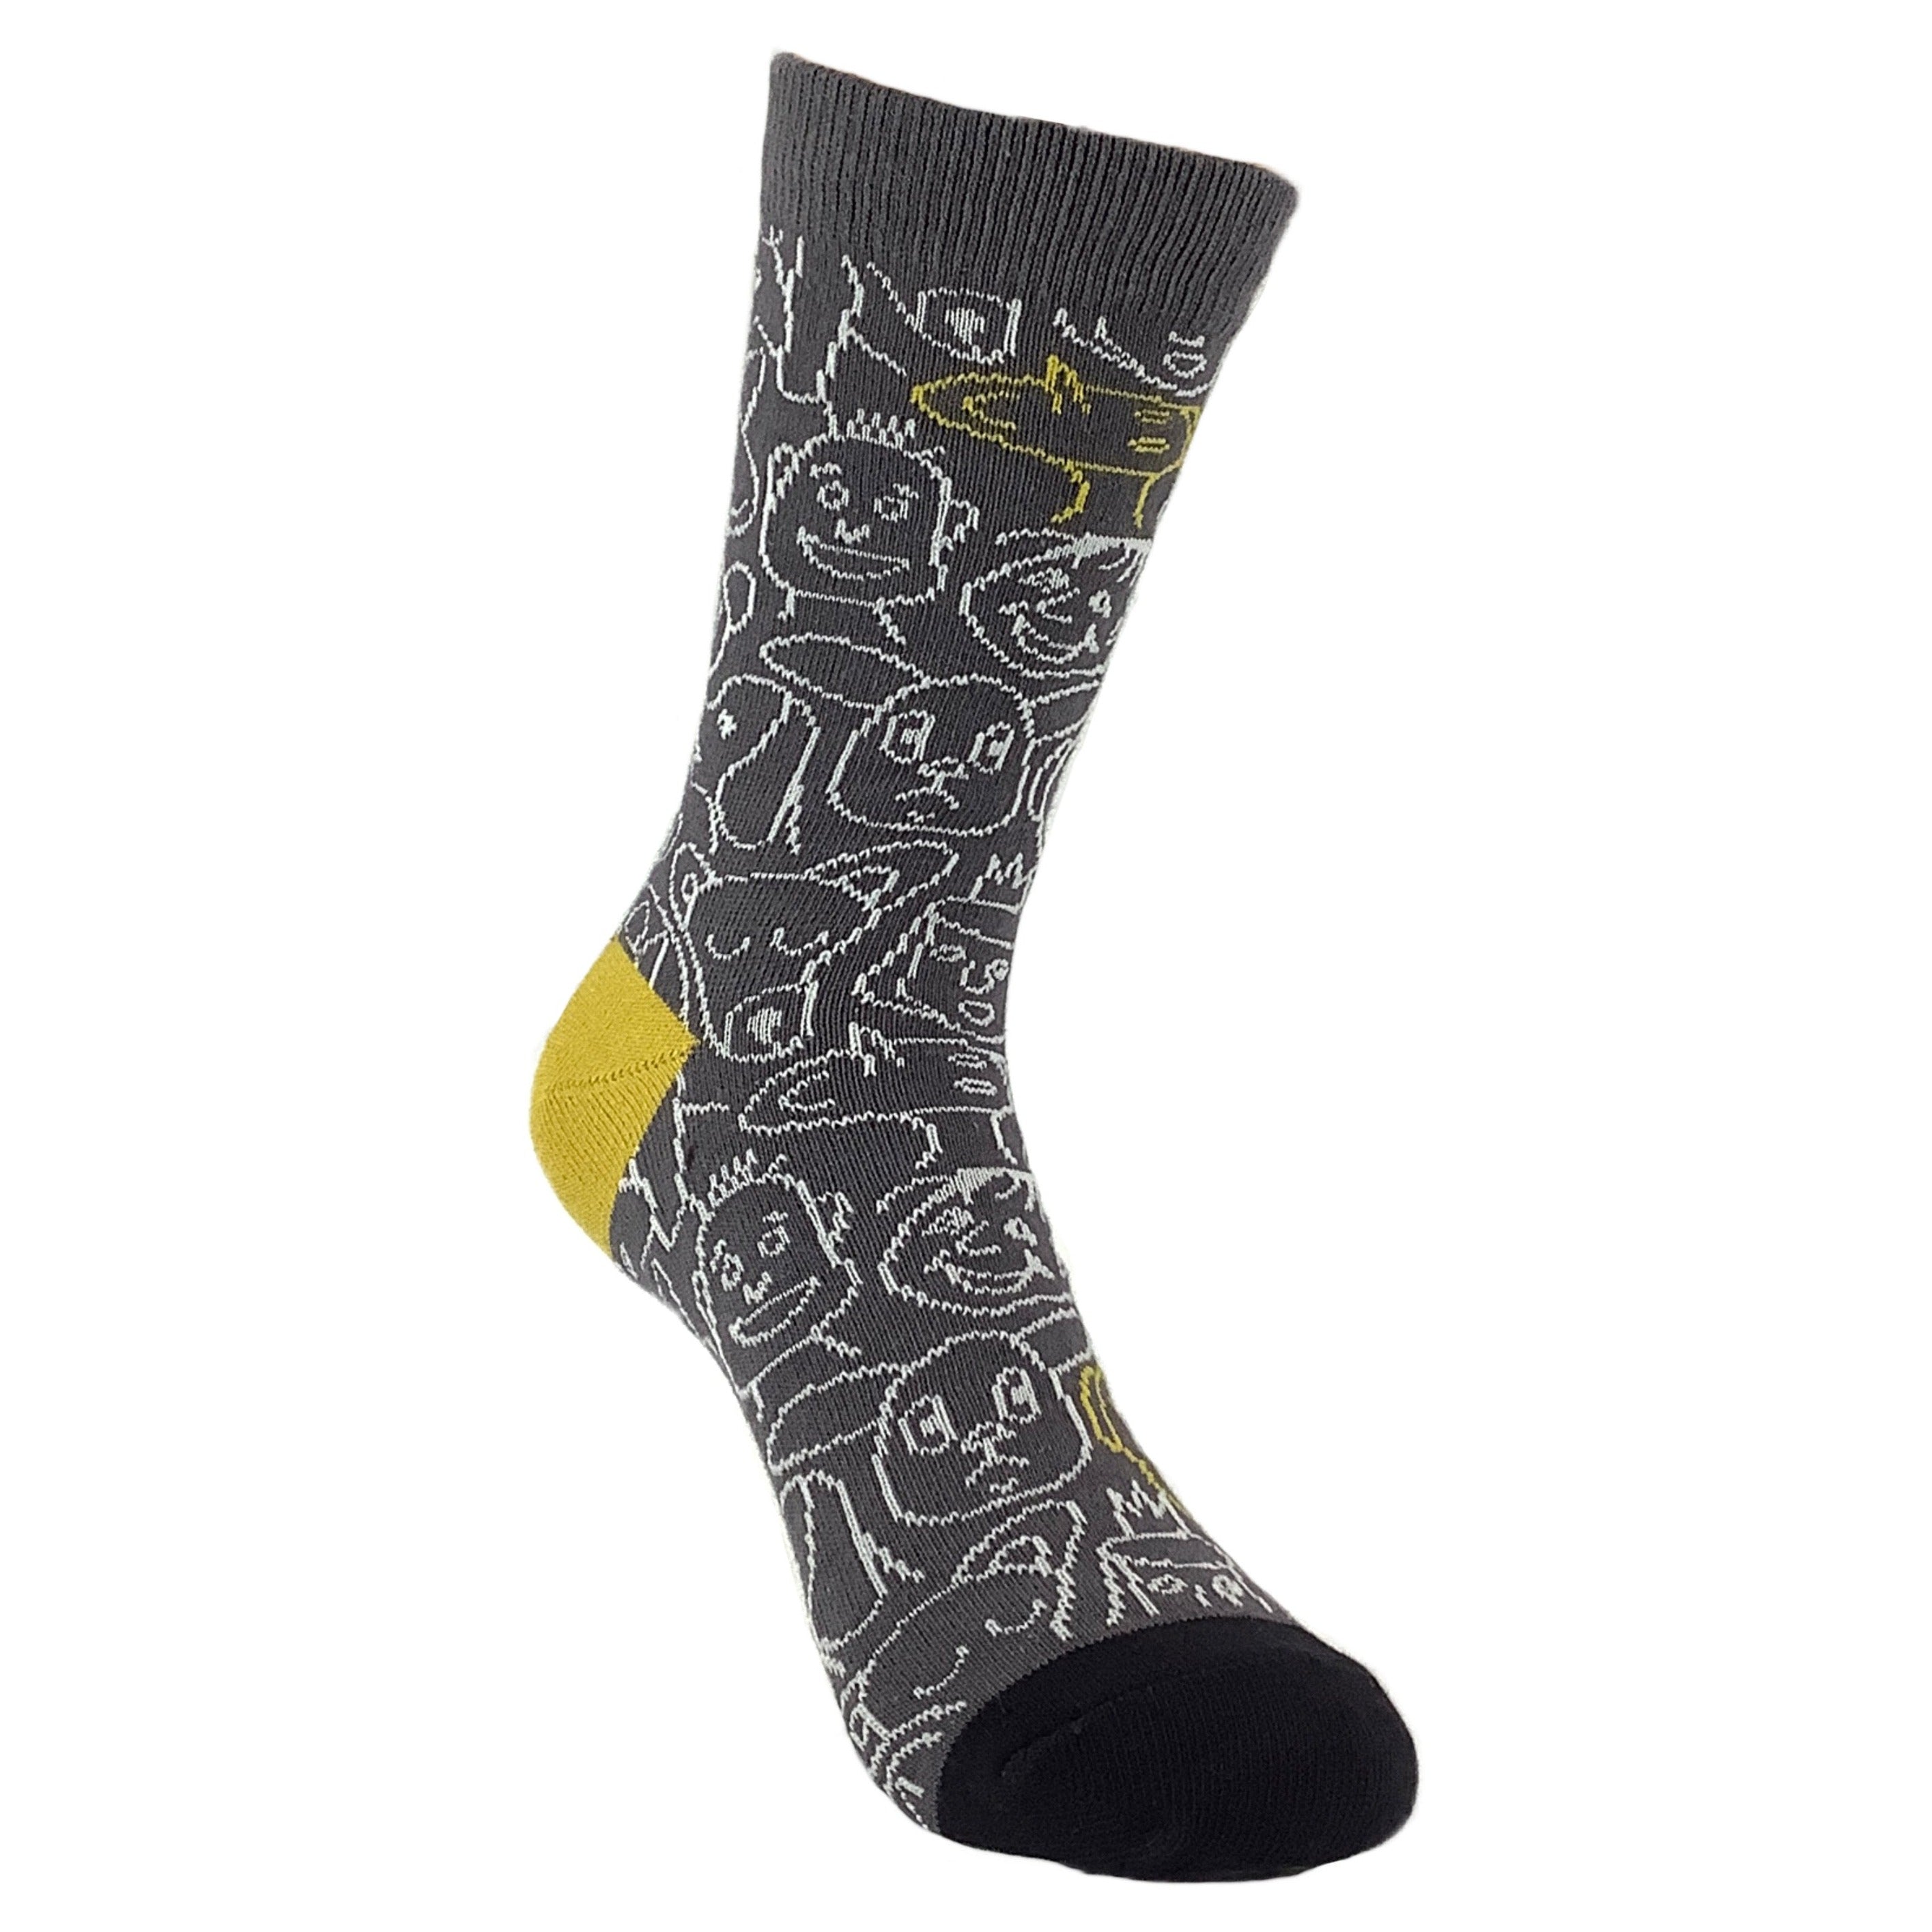 Funny Faces Socks from the Sock Panda (Adult Small)